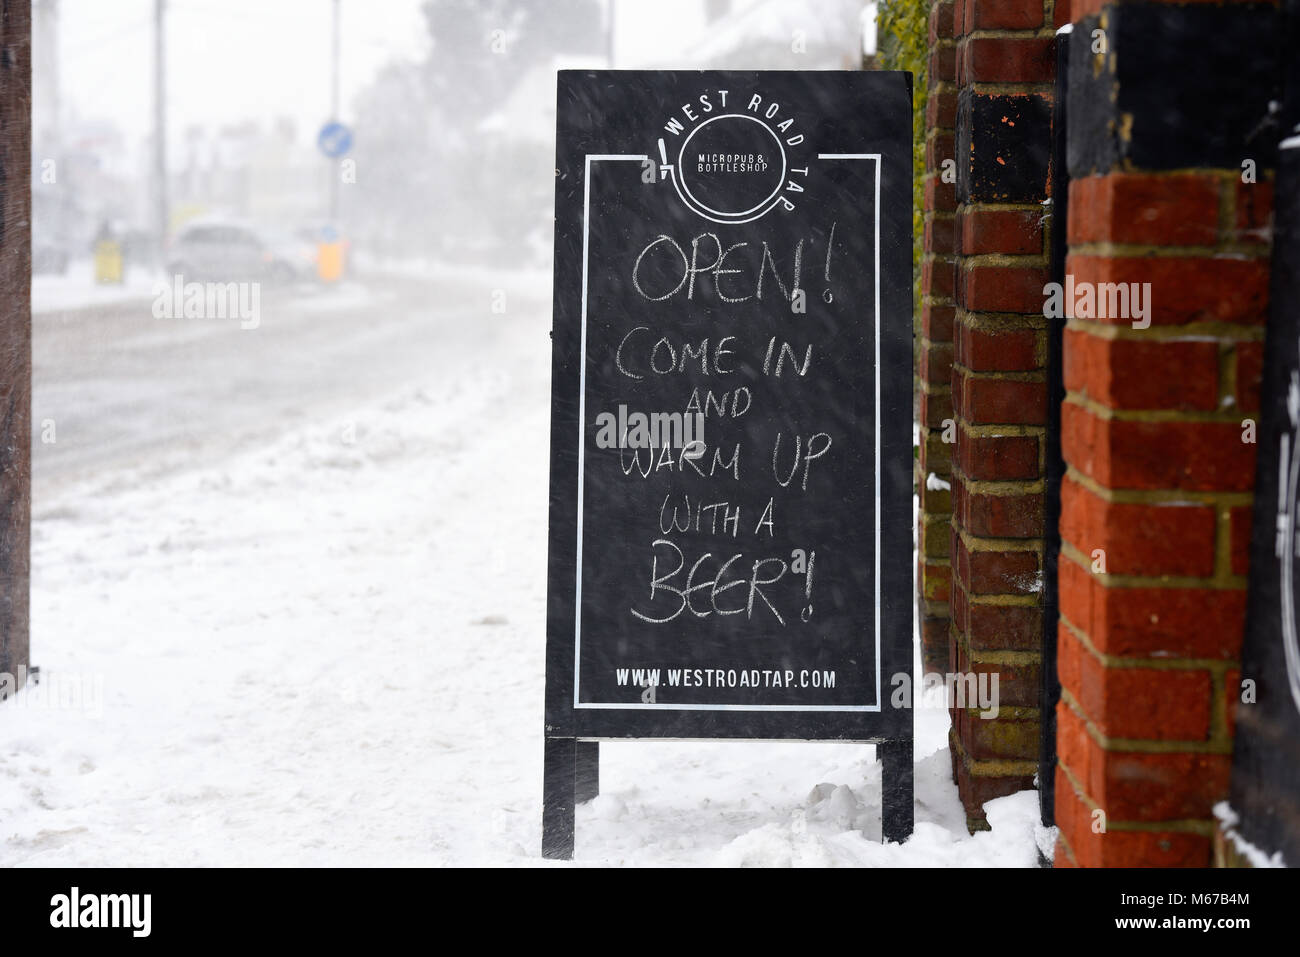 Beast from the East snow continues to be an issue in the Southend area. Micropub West Road Tap put out a humorous message to passers-by to warm up with a beer Stock Photo